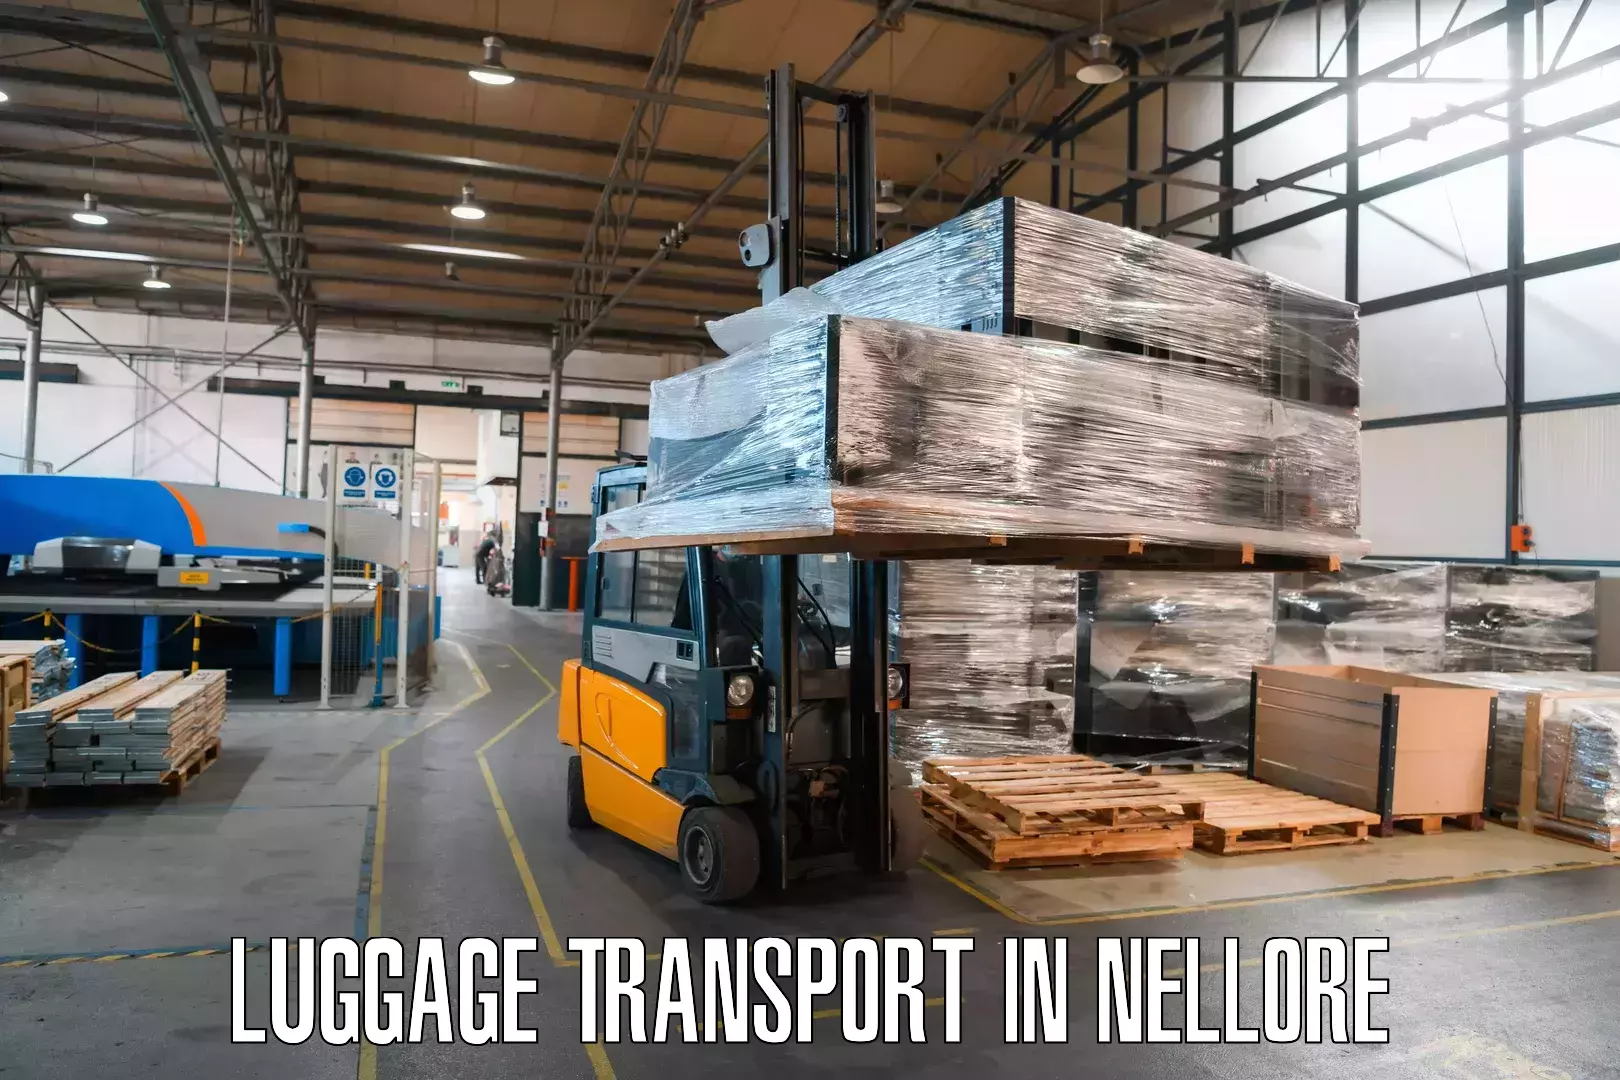 Discounted baggage transport in Nellore